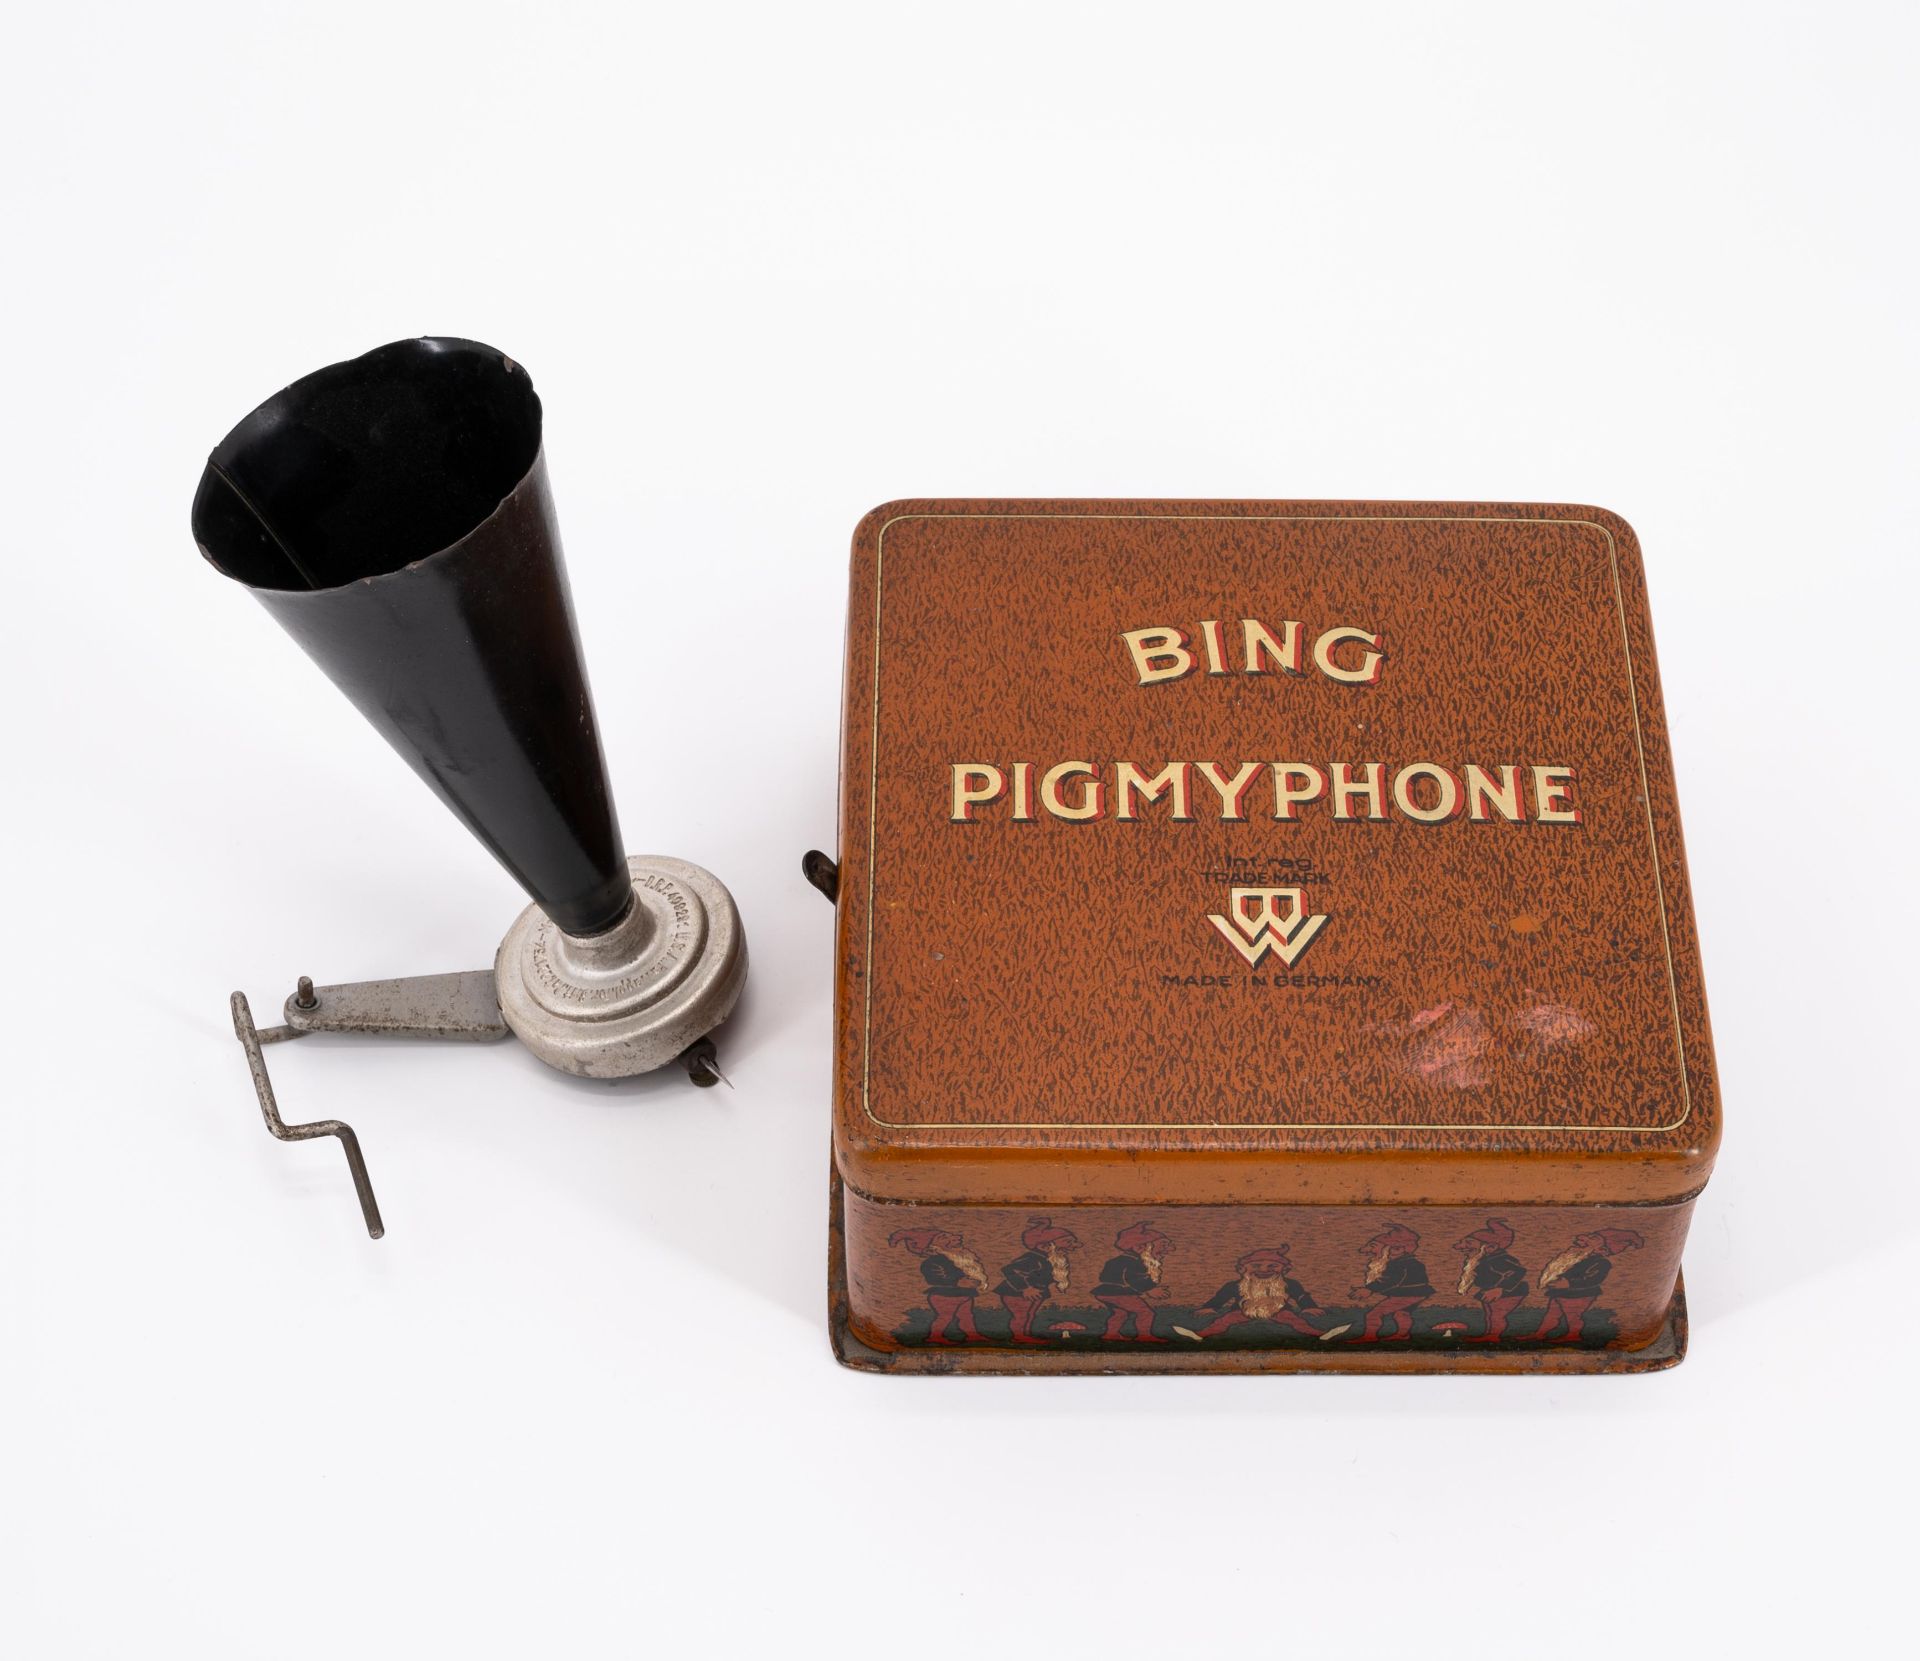 CHILDREN'S TYPEWRITER, SMALL LATERNA MAGICA, DOLL'S GRAMMOPHONE "PIGMYPHONE" MADE OF SHEET METAL, GL - Image 5 of 7